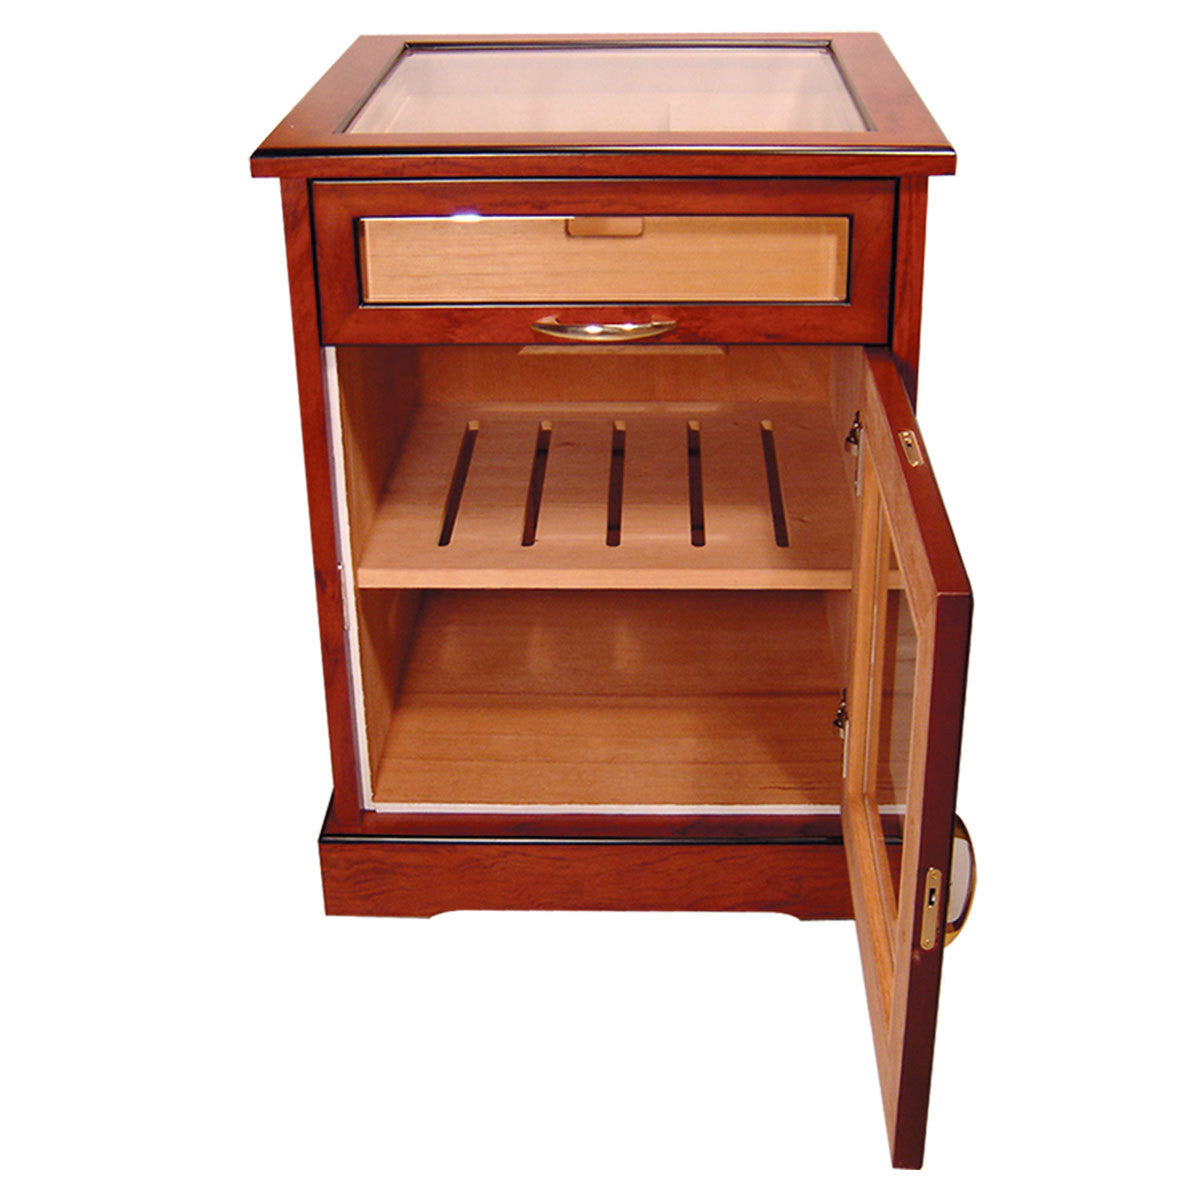 Cuban Crafters Cabinet Humidors End Table Humidor For 600 Cigars